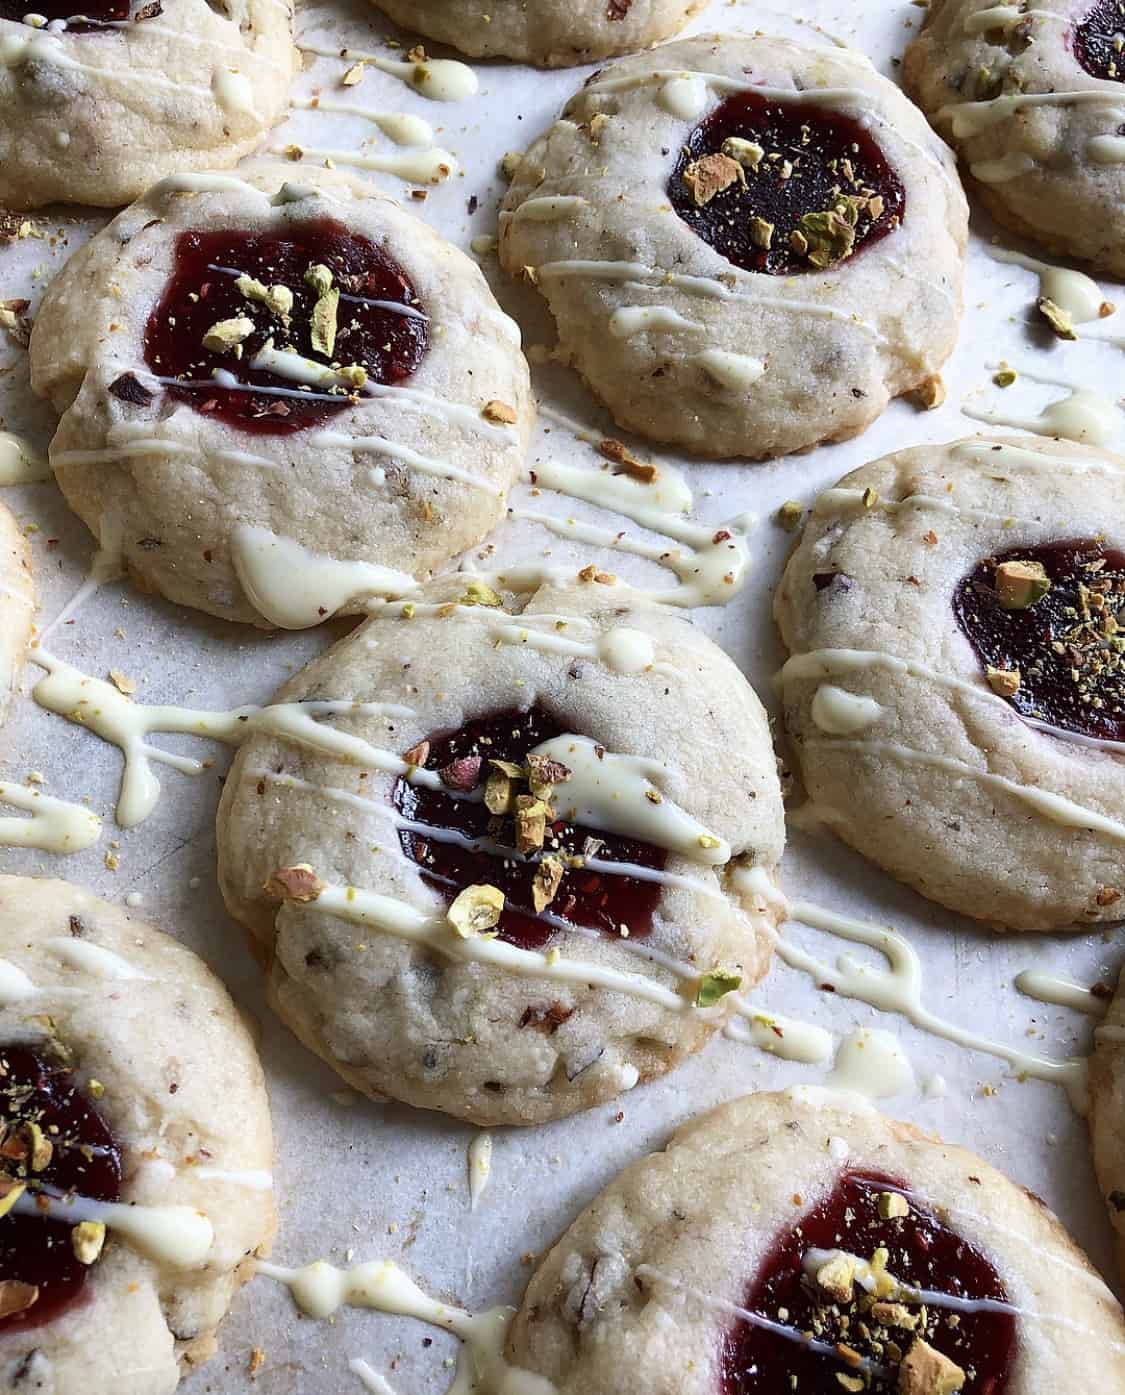 Pistachio Ghoraybeh Thumbprint Cookies (Middle Eastern Shortbread)